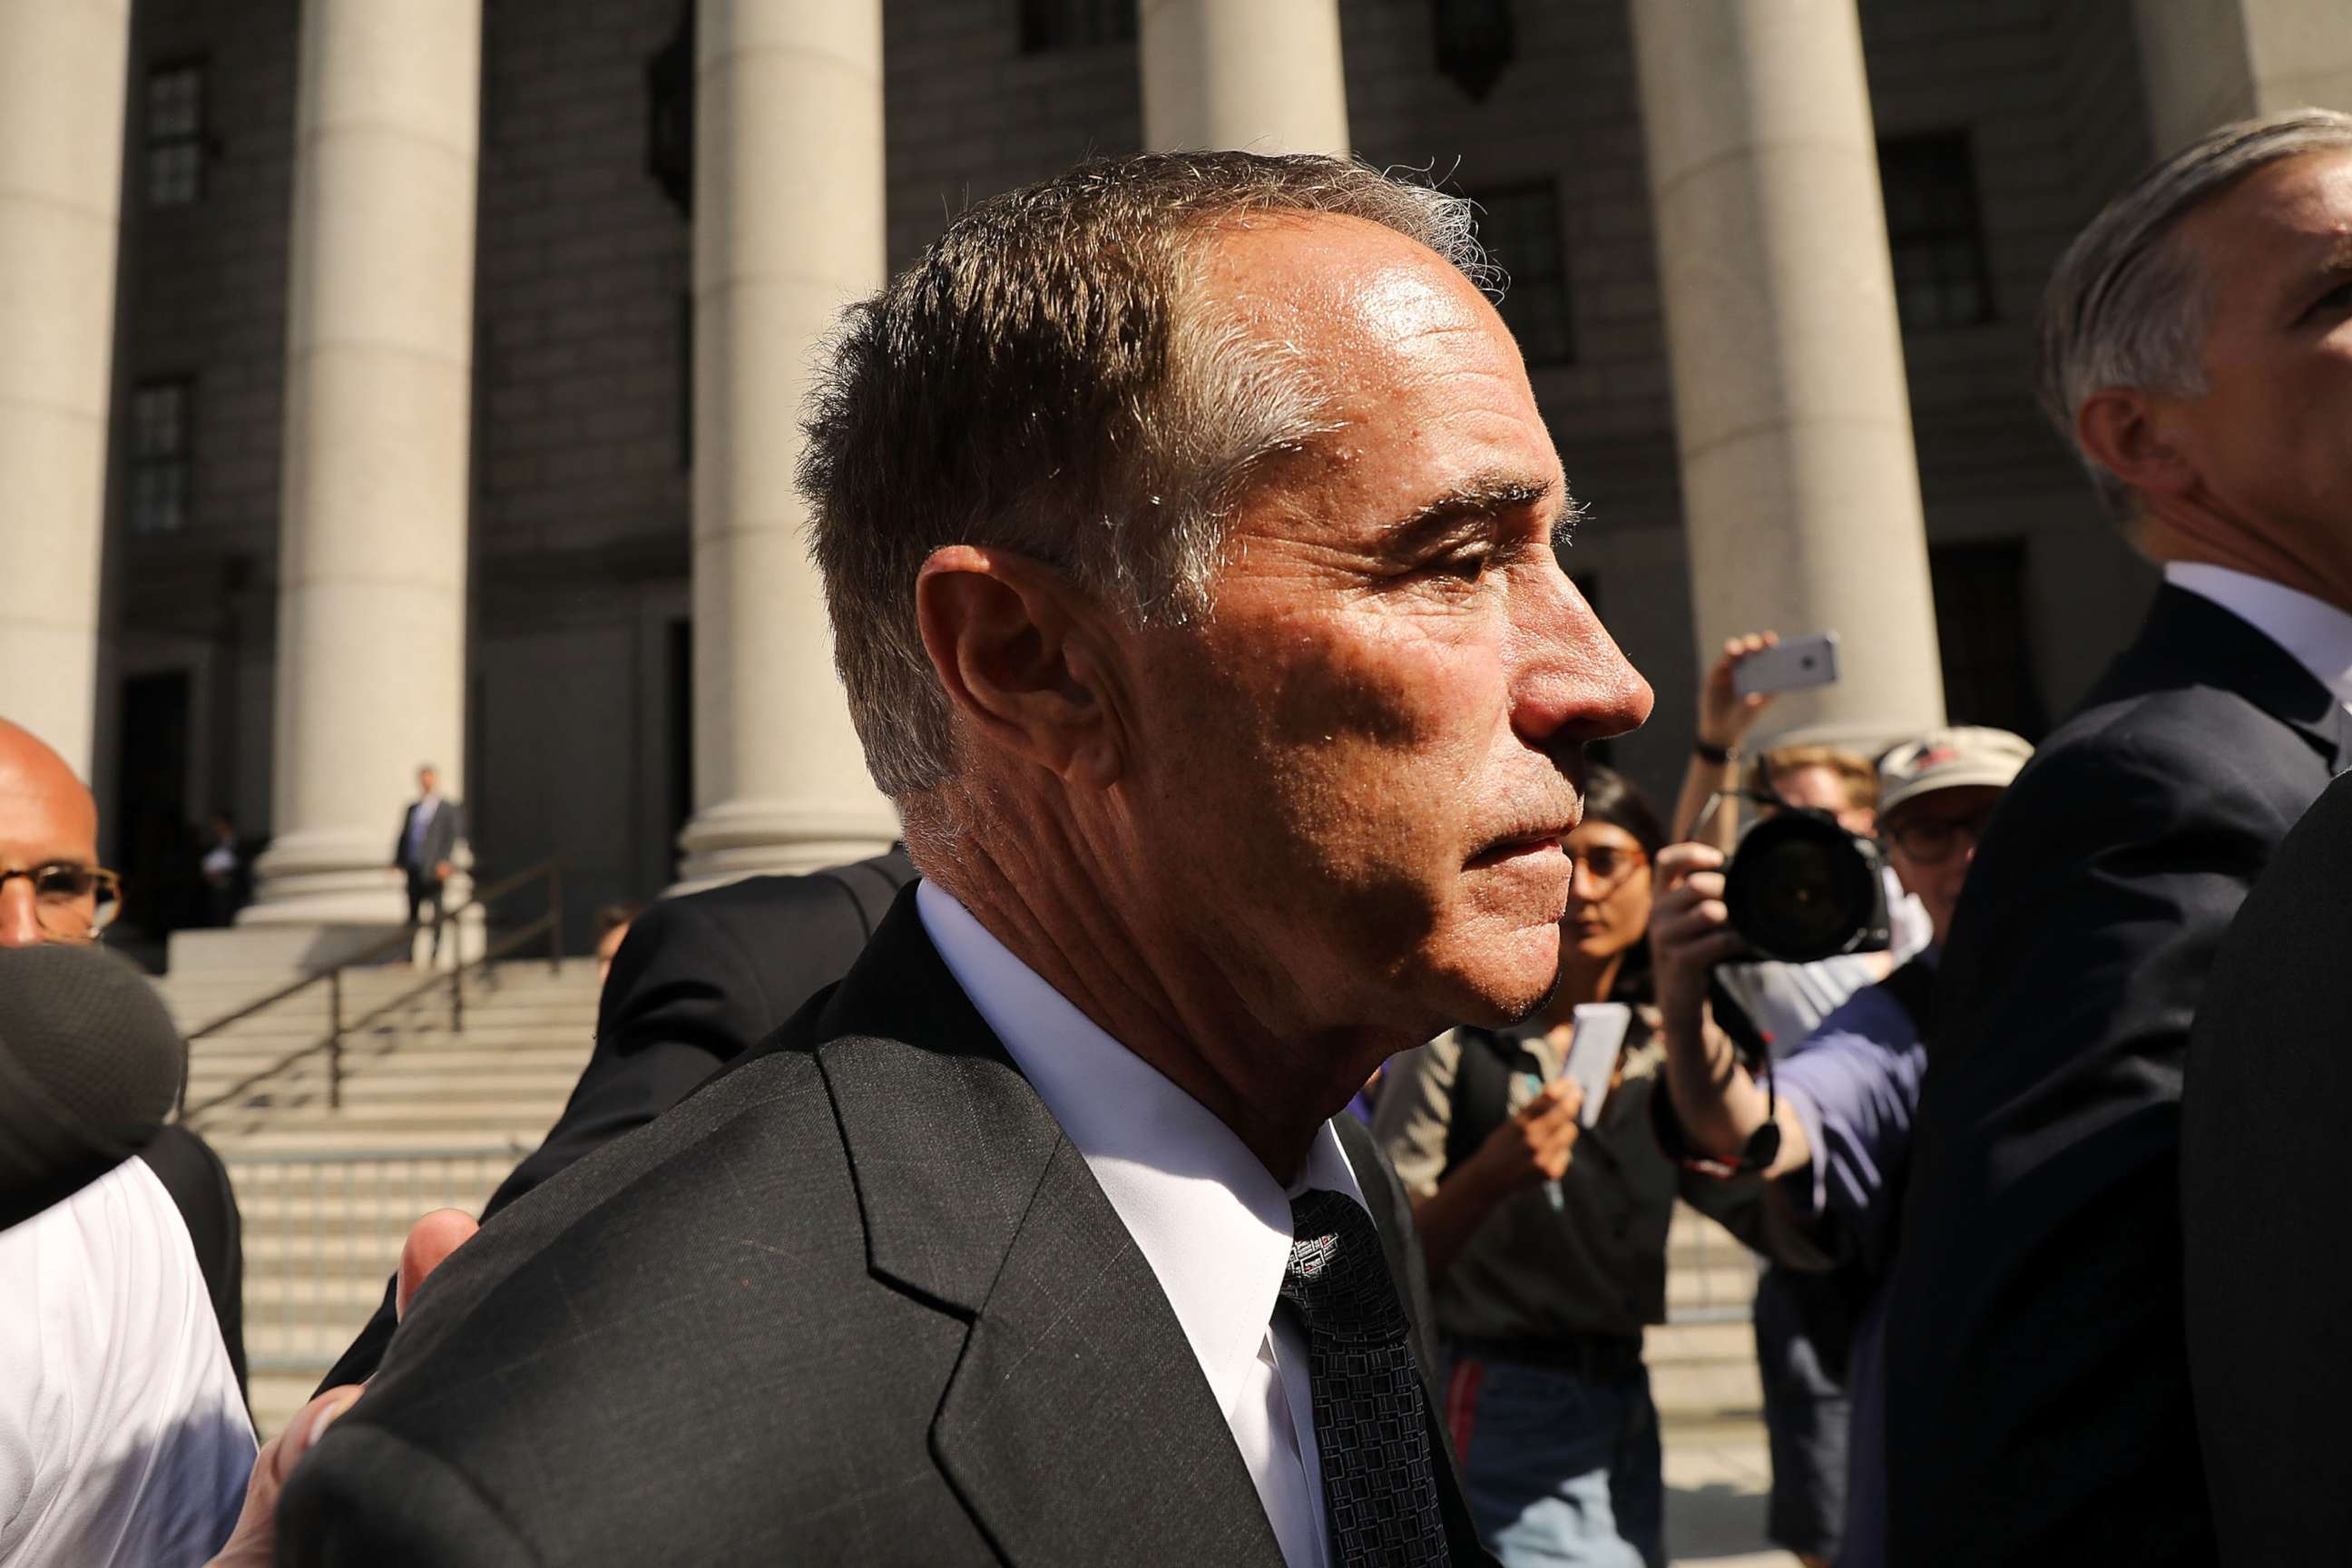 PHOTO: Rep. Chris Collins walks out of a New York court house after being charged with insider trading on August 8, 2018 in New York City.